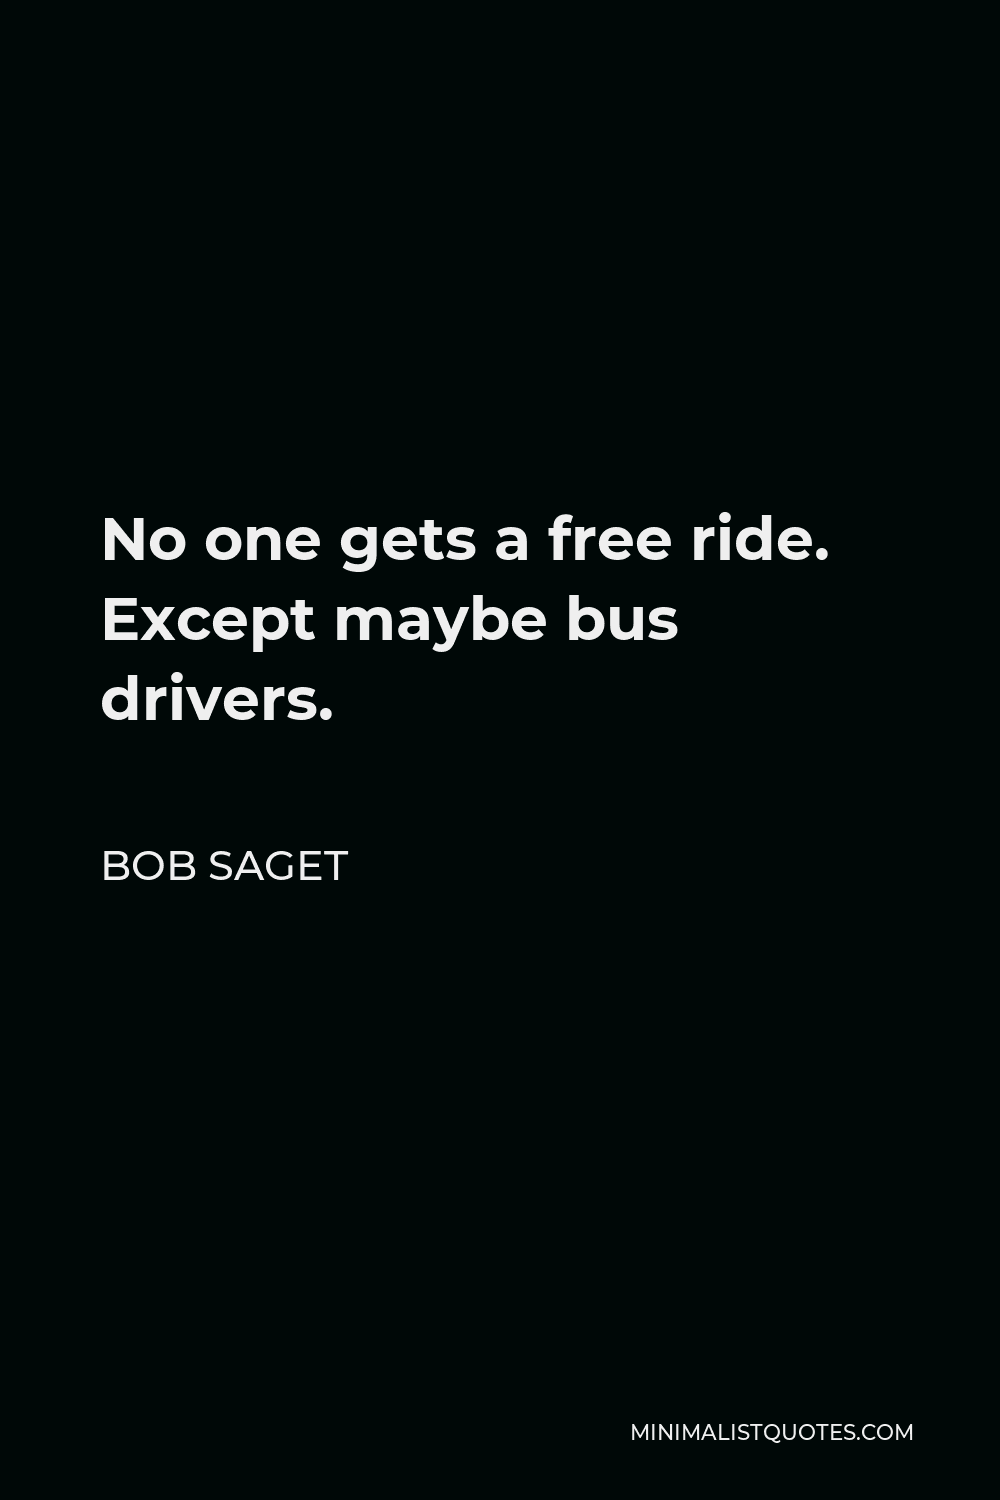 Bob Saget Quote - No one gets a free ride. Except maybe bus drivers.